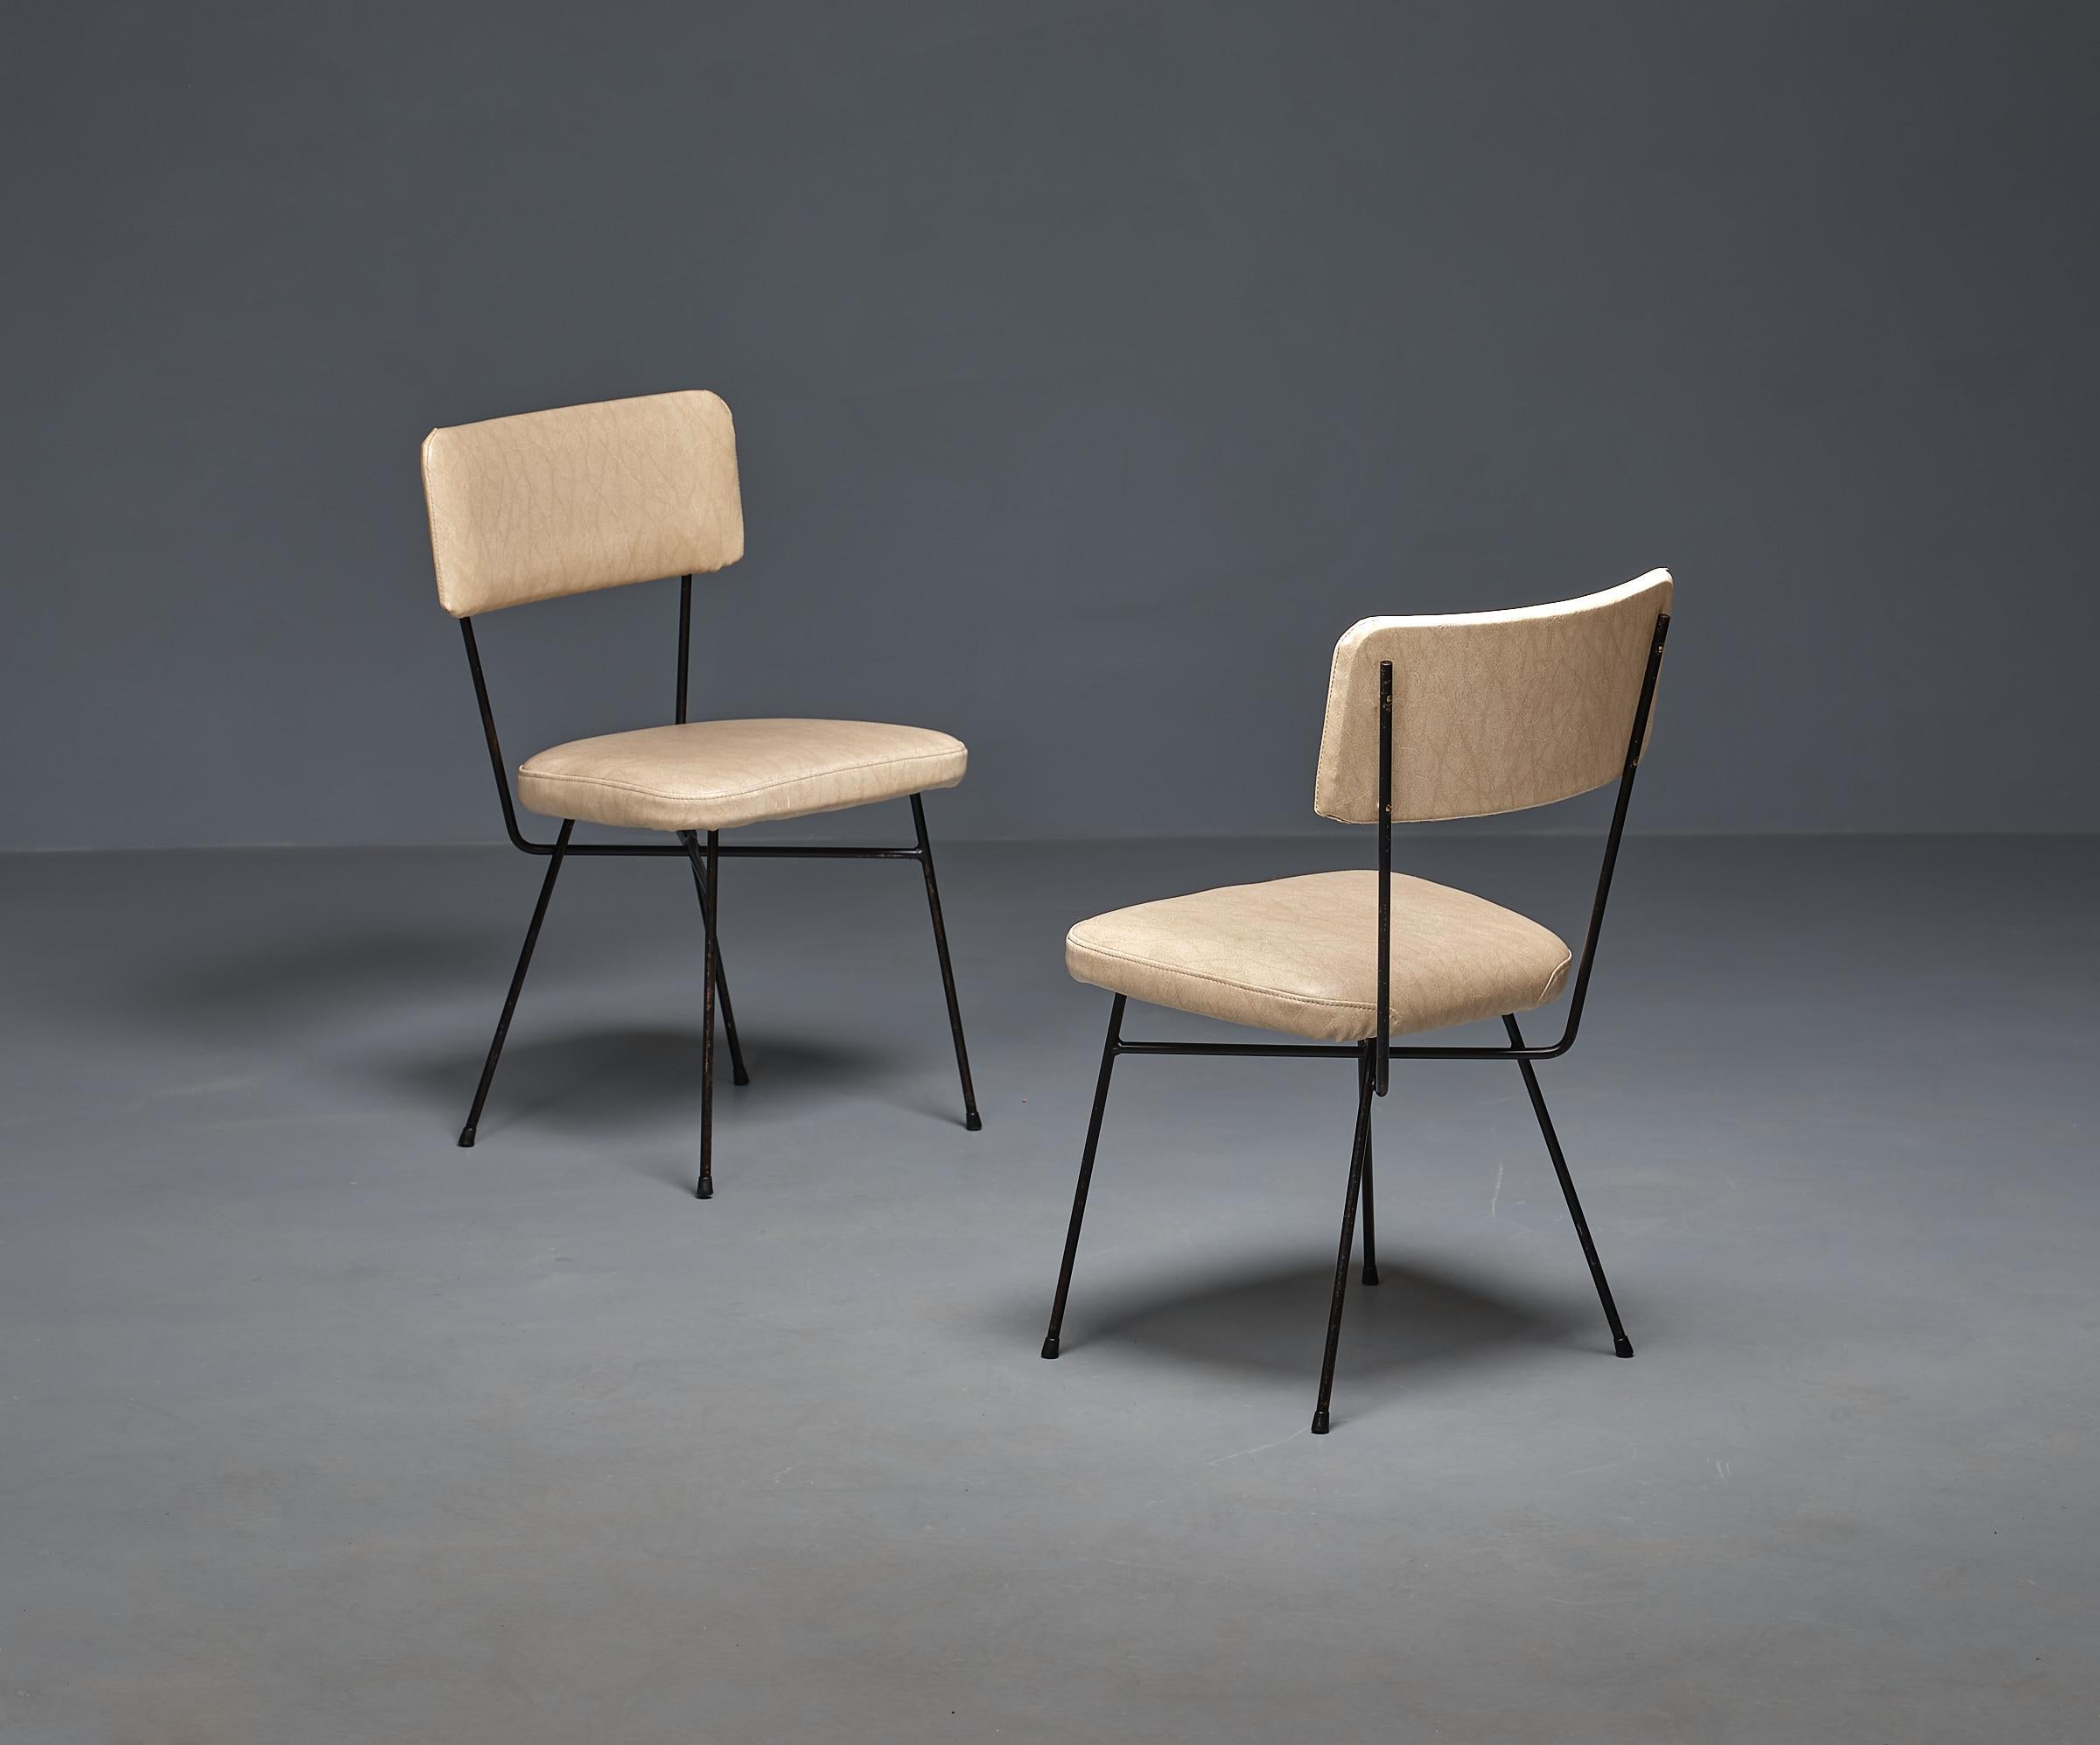 Introducing a captivating pair of vintage chairs from the 1950s, These chairs are a beautiful nod to mid-century Italian design.

With their sturdy black-painted iron frames, these chairs exude a timeless appeal. They feature elegant Skai upholstery